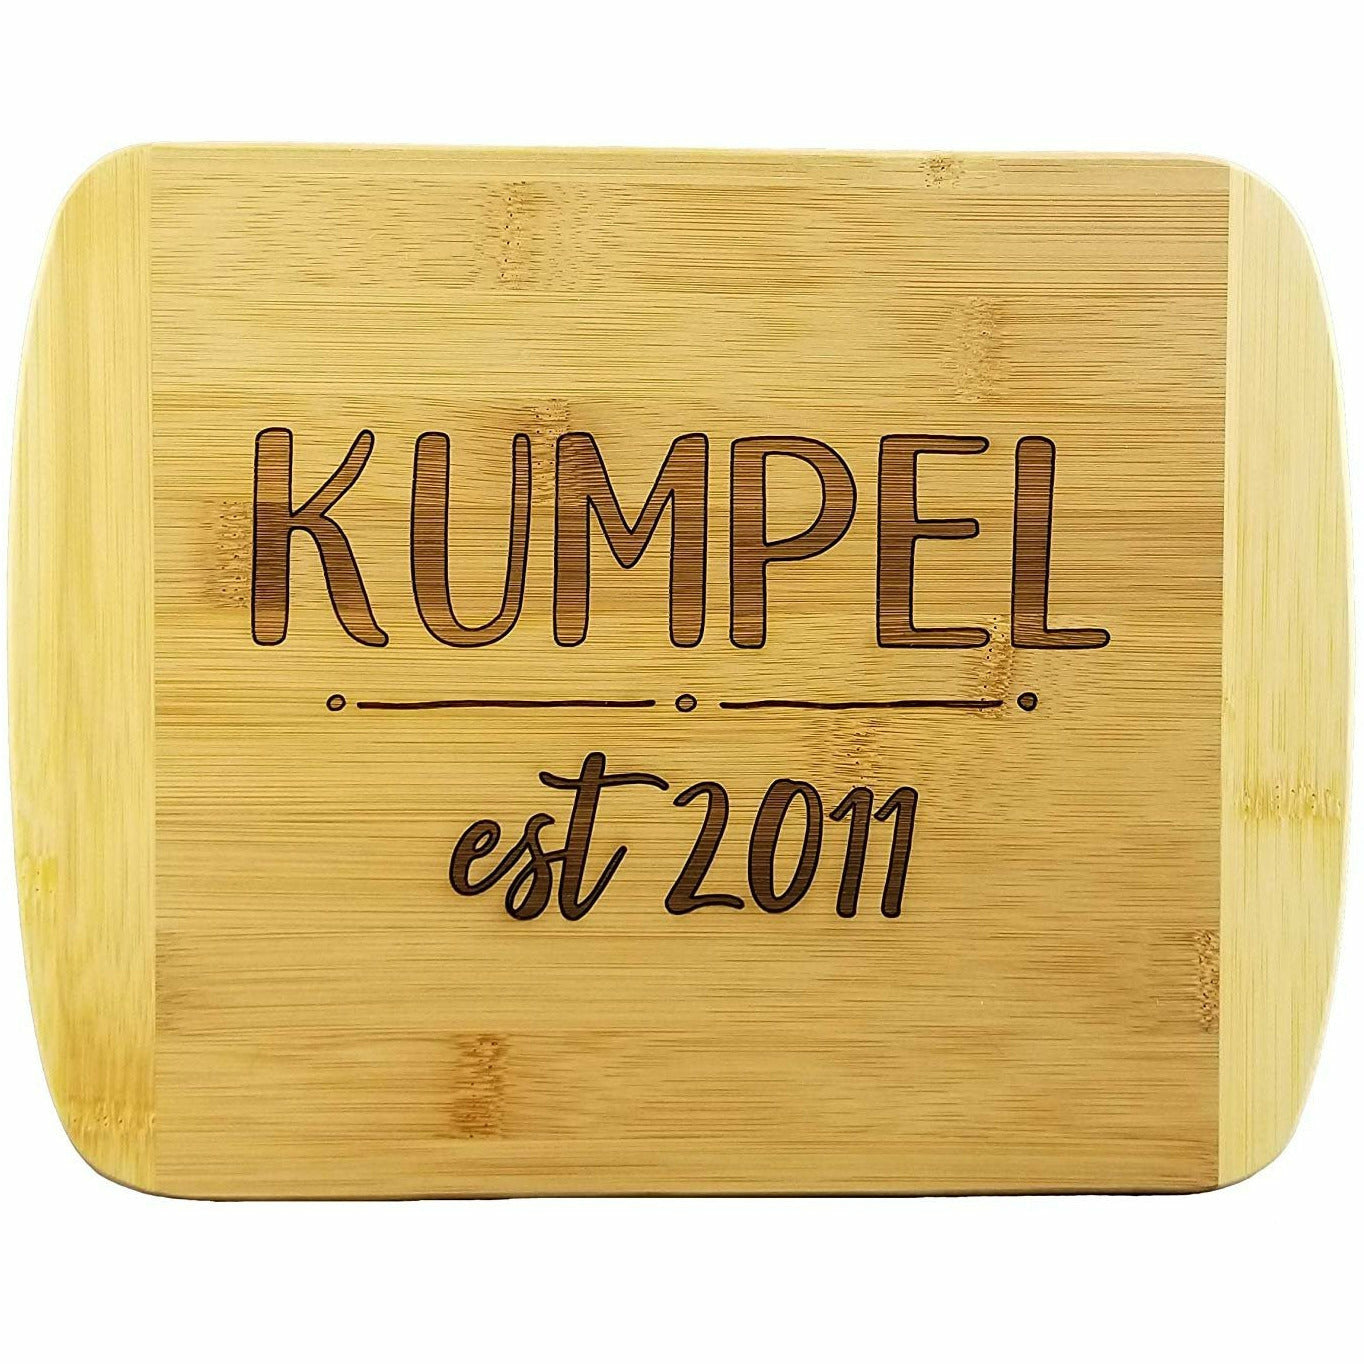 Personalized Cutting Board, Christmas Gift for couple - Unique Wedding,  Anniversary, or Bridal Shower present, Engraved Bamboo Cheese Board